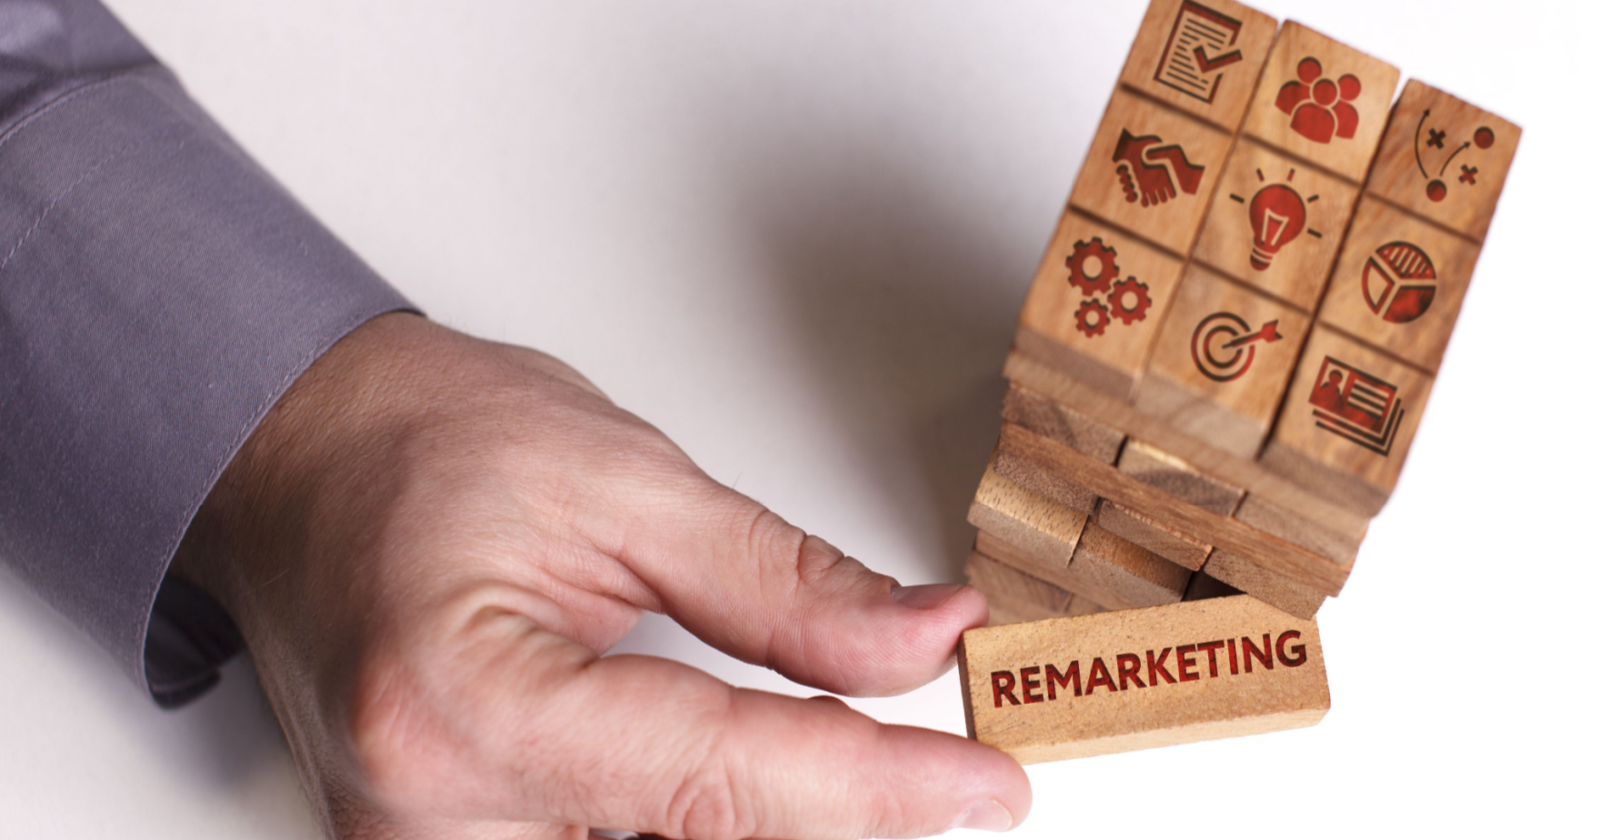 6 Remarketing Campaign Mistakes You Must Avoid